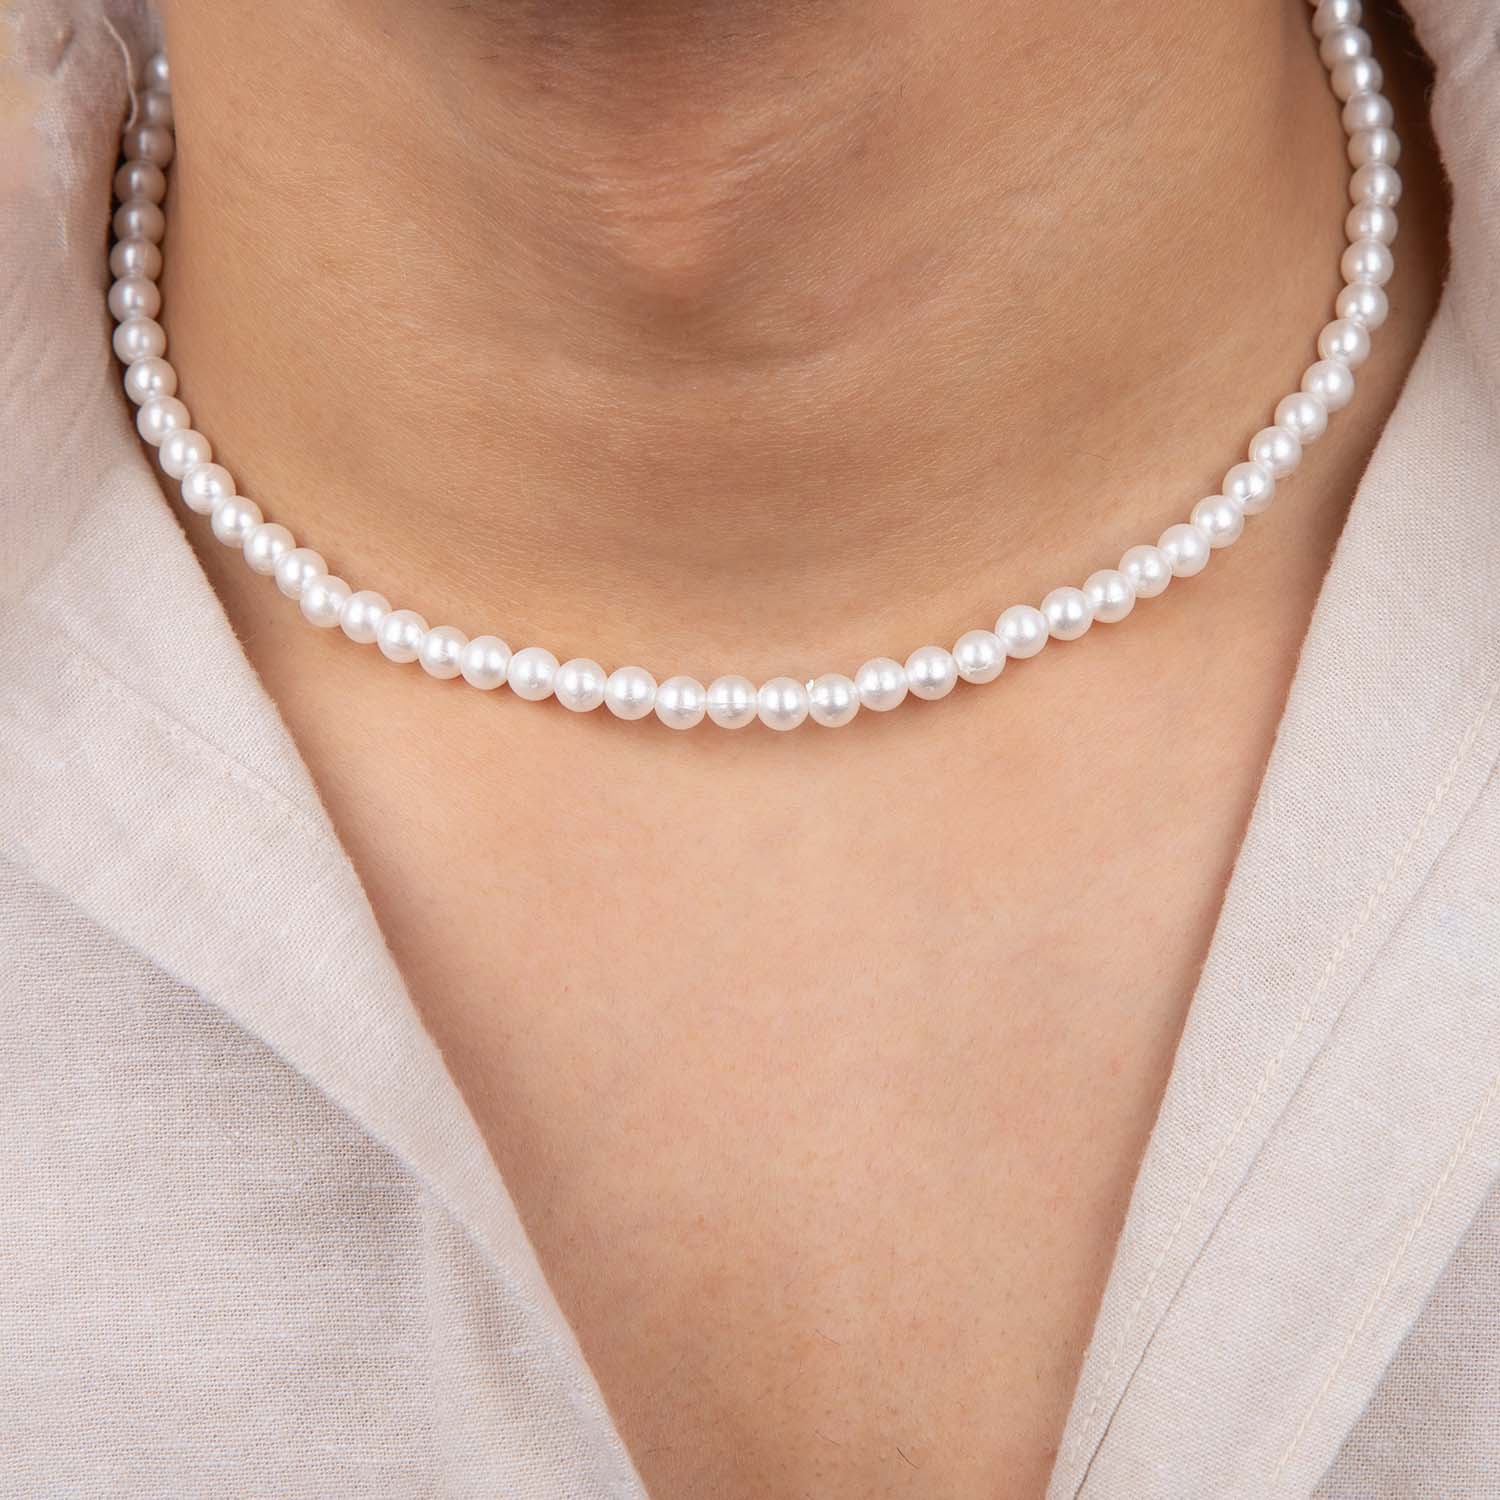 Pearls of Motherhood Pearl Necklace | Dogeared